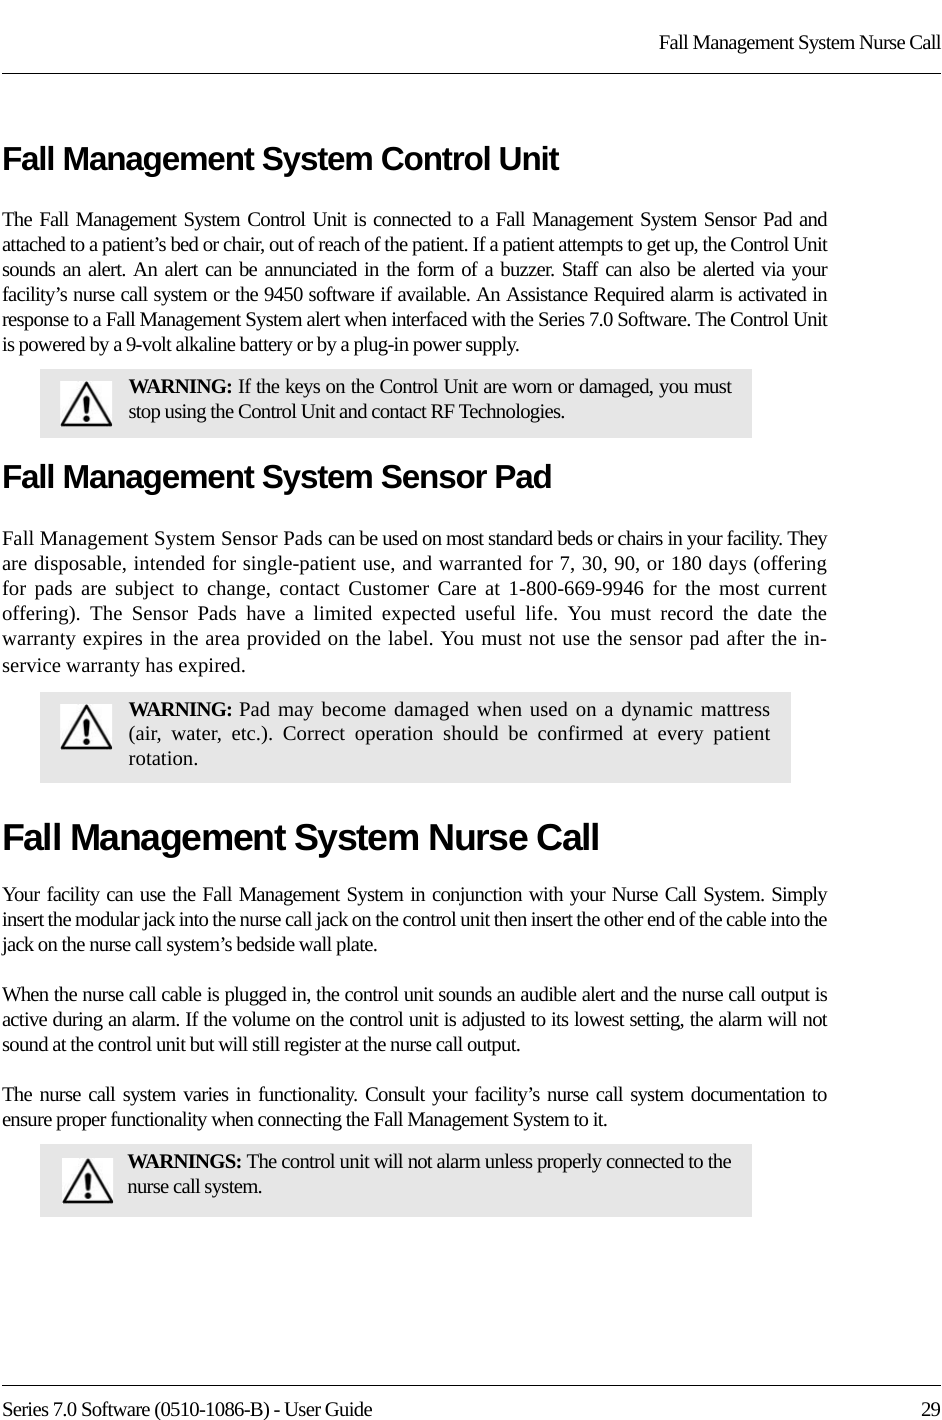 Series 7.0 Software (0510-1086-B) - User Guide  29Fall Management System Nurse CallFall Management System Control UnitThe Fall Management System Control Unit is connected to a Fall Management System Sensor Pad and attached to a patient’s bed or chair, out of reach of the patient. If a patient attempts to get up, the Control Unit sounds an alert. An alert can be annunciated in the form of a buzzer. Staff can also be alerted via your facility’s nurse call system or the 9450 software if available. An Assistance Required alarm is activated in response to a Fall Management System alert when interfaced with the Series 7.0 Software. The Control Unit is powered by a 9-volt alkaline battery or by a plug-in power supply.Fall Management System Sensor PadFall Management System Sensor Pads can be used on most standard beds or chairs in your facility. They are disposable, intended for single-patient use, and warranted for 7, 30, 90, or 180 days (offering for pads are subject to change, contact Customer Care at 1-800-669-9946 for the most current offering). The Sensor Pads have a limited expected useful life. You must record the date the warranty expires in the area provided on the label. You must not use the sensor pad after the in-service warranty has expired.Fall Management System Nurse CallYour facility can use the Fall Management System in conjunction with your Nurse Call System. Simply insert the modular jack into the nurse call jack on the control unit then insert the other end of the cable into the jack on the nurse call system’s bedside wall plate.When the nurse call cable is plugged in, the control unit sounds an audible alert and the nurse call output is active during an alarm. If the volume on the control unit is adjusted to its lowest setting, the alarm will not sound at the control unit but will still register at the nurse call output.The nurse call system varies in functionality. Consult your facility’s nurse call system documentation to ensure proper functionality when connecting the Fall Management System to it. WARNING: If the keys on the Control Unit are worn or damaged, you must stop using the Control Unit and contact RF Technologies.WARNING: Pad may become damaged when used on a dynamic mattress (air, water, etc.). Correct operation should be confirmed at every patient rotation.WARNINGS: The control unit will not alarm unless properly connected to the nurse call system.